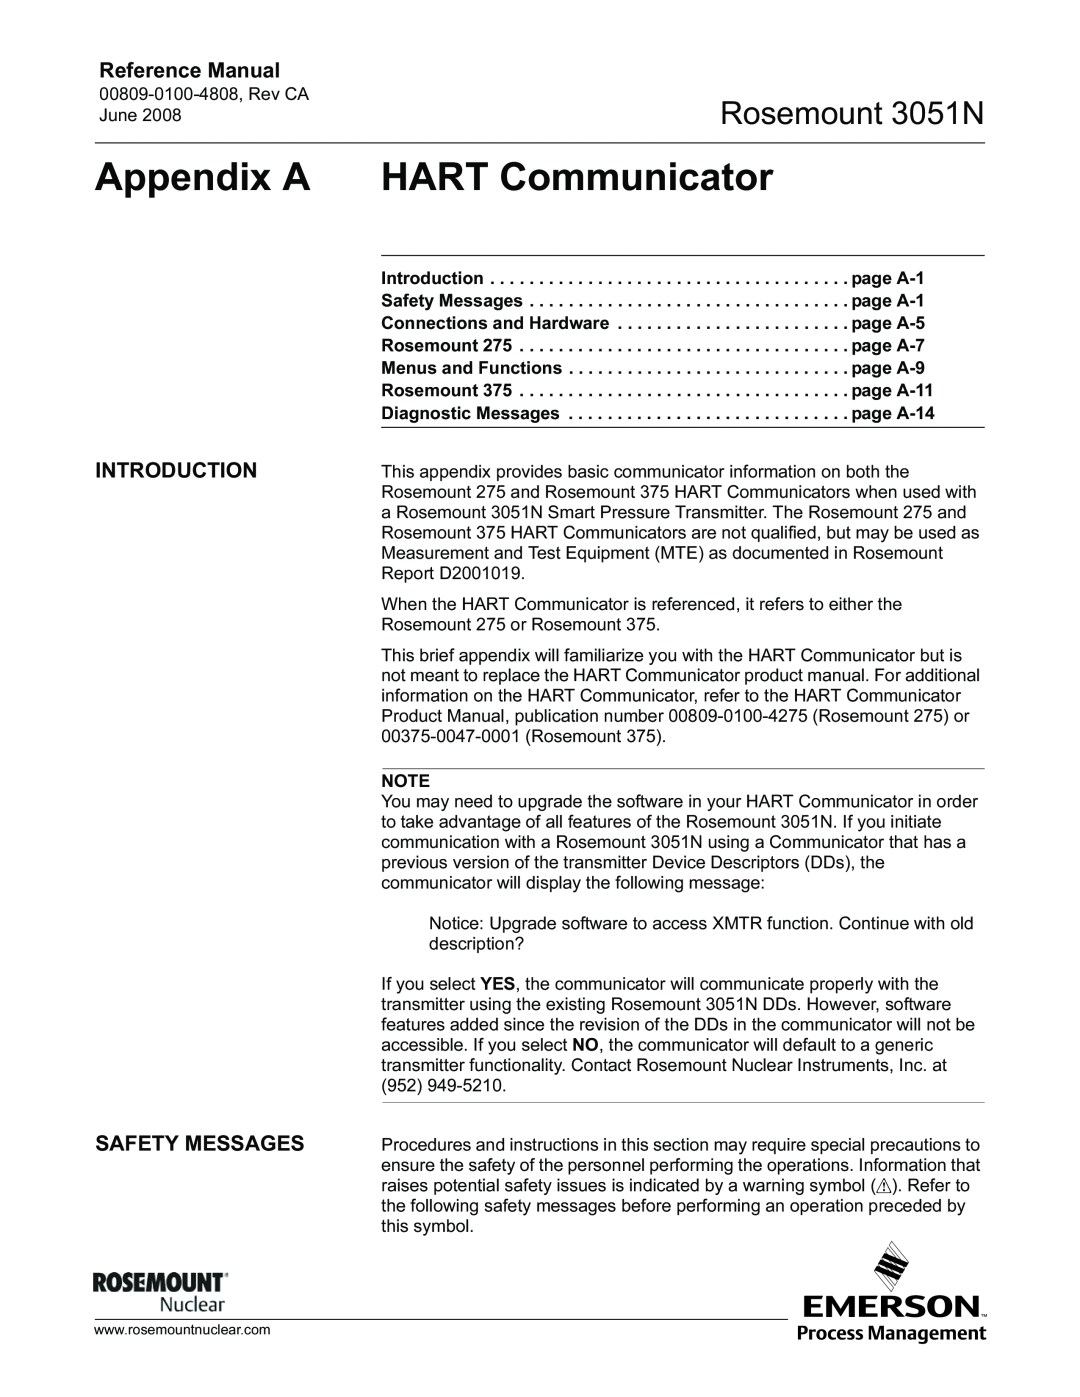 Emerson manual Appendix A HART Communicator, Introduction Safety Messages, Rosemount 3051N, Reference Manual 